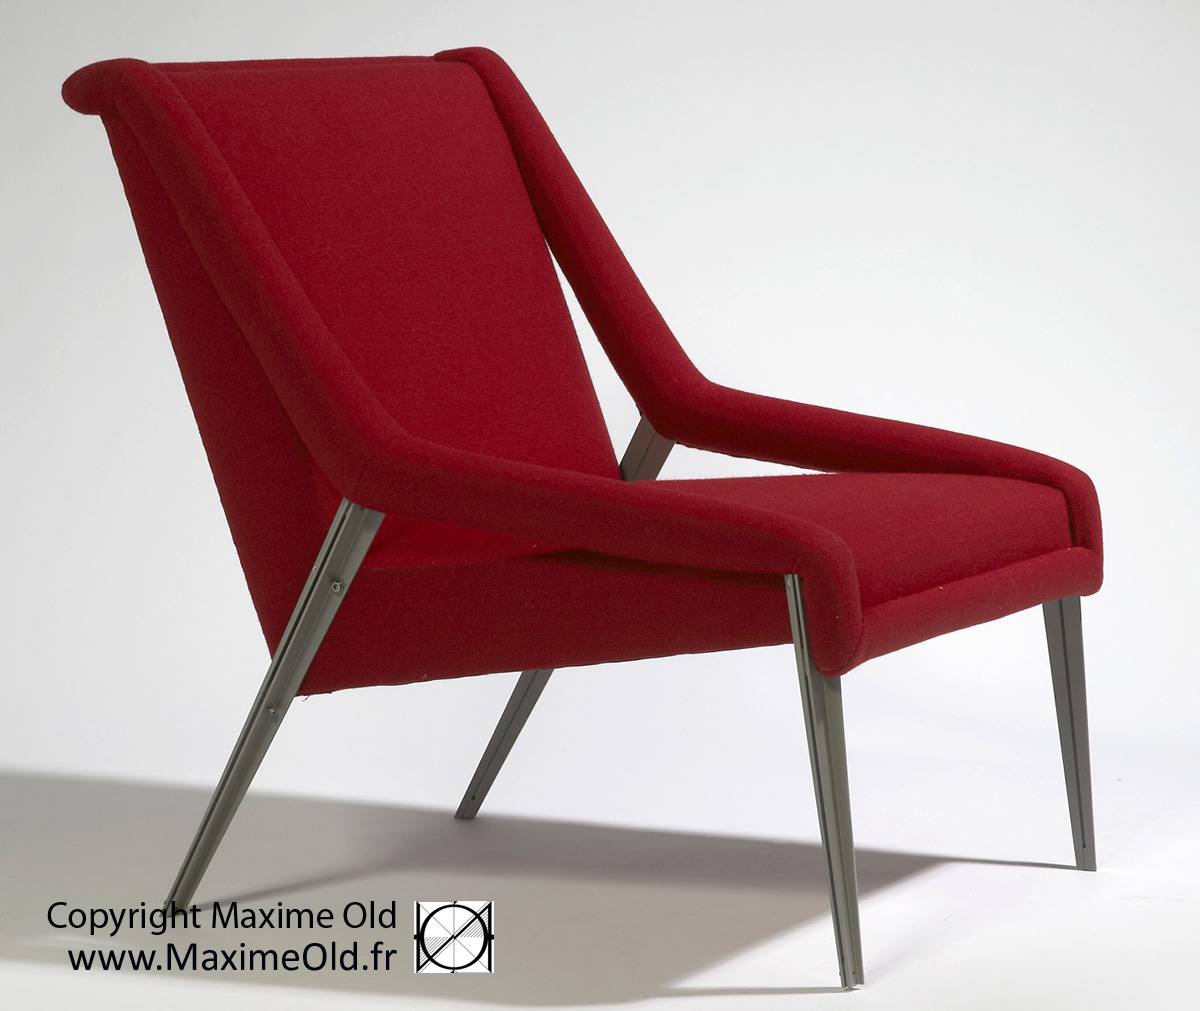 Maxime Old Seats: Maxime Old Paquebot France Light Armchair 